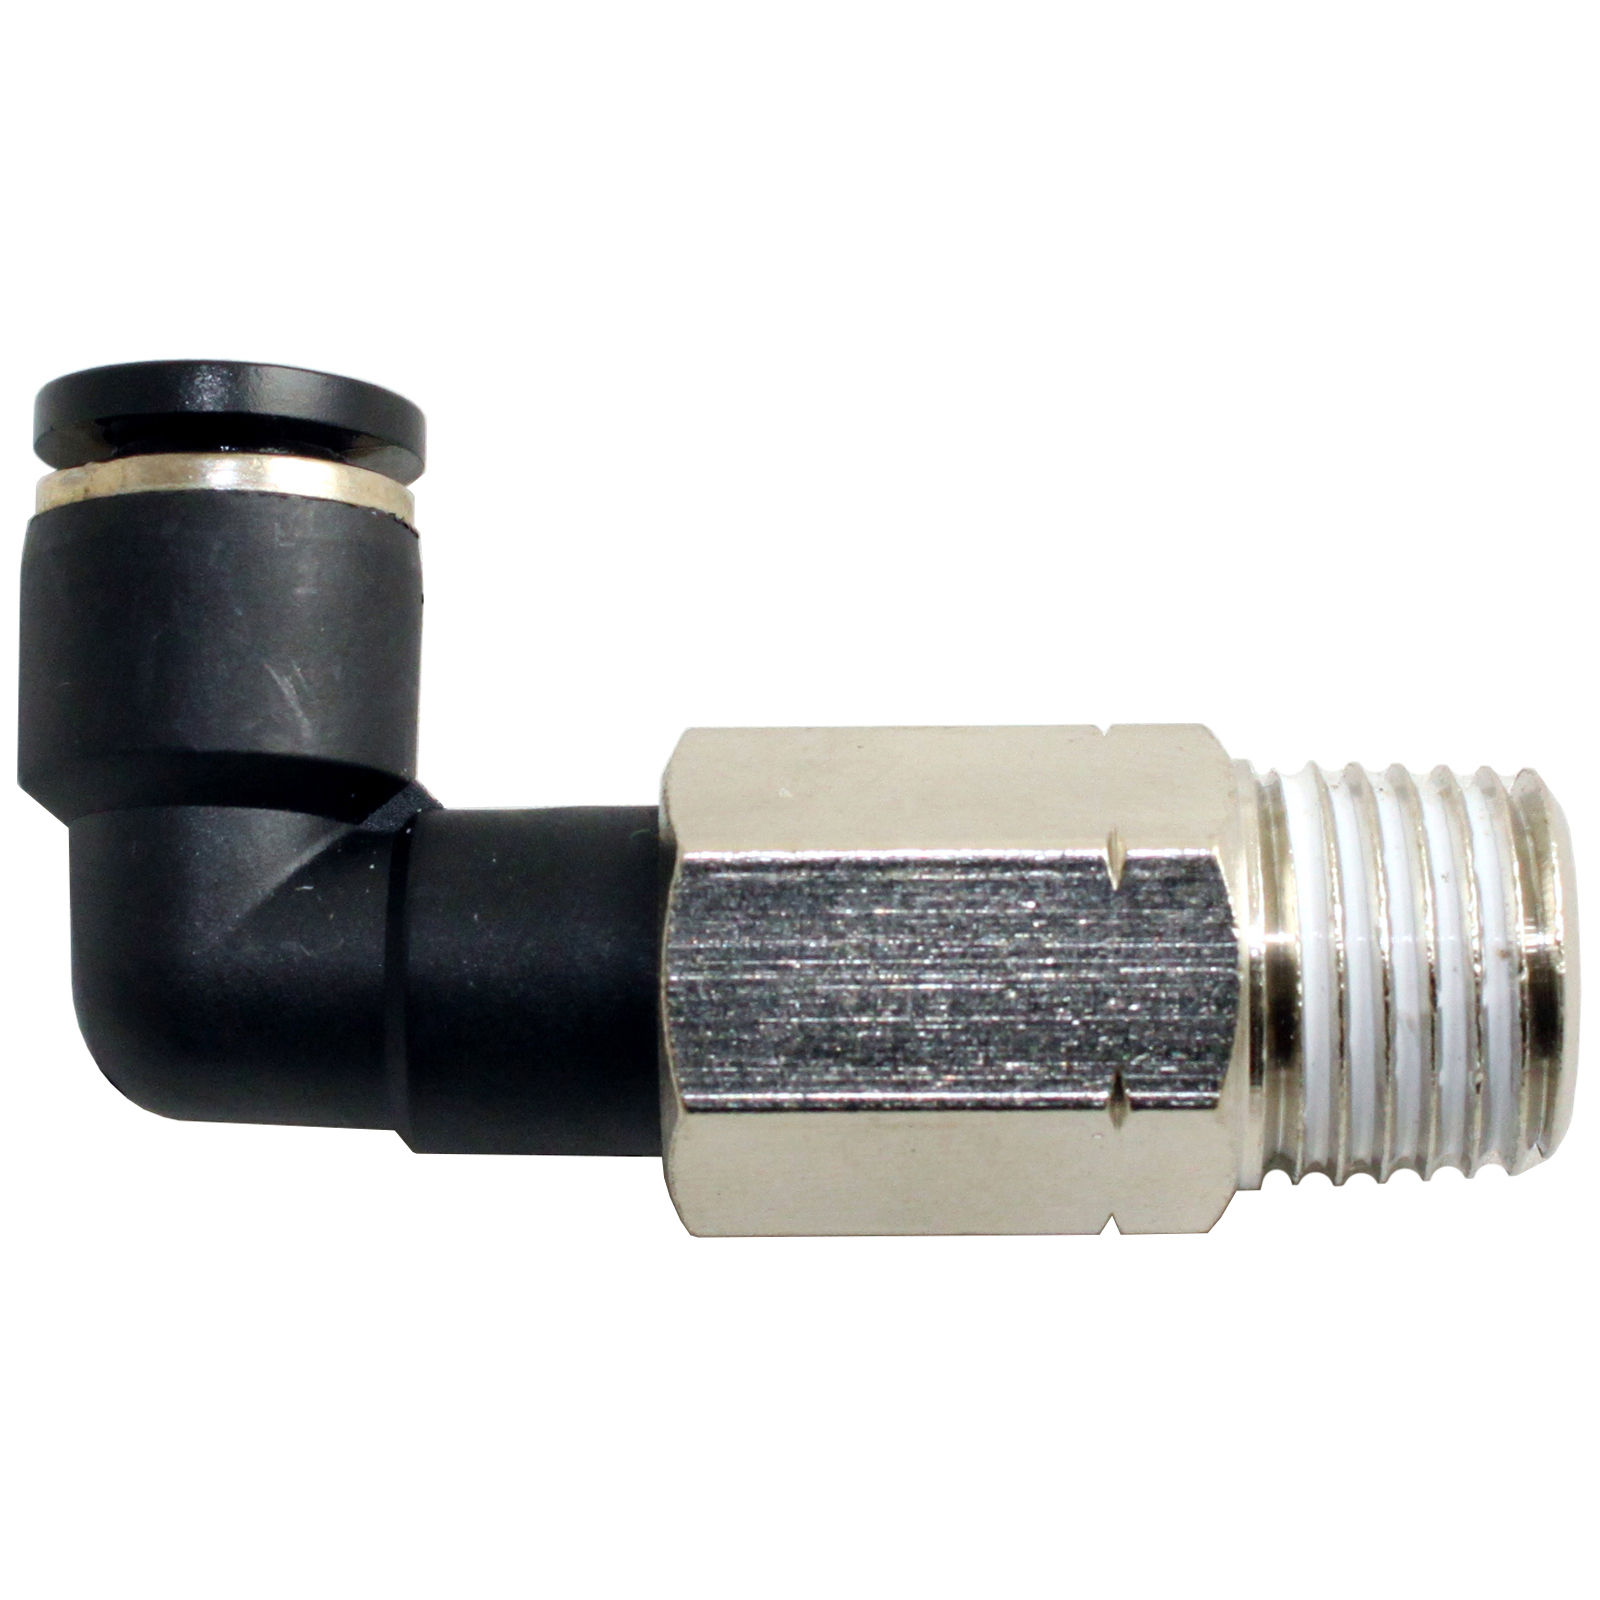 4-12mm Push-in Fittings Pneumatic Air Line Tube Hose Bulkhead Connector Straight 